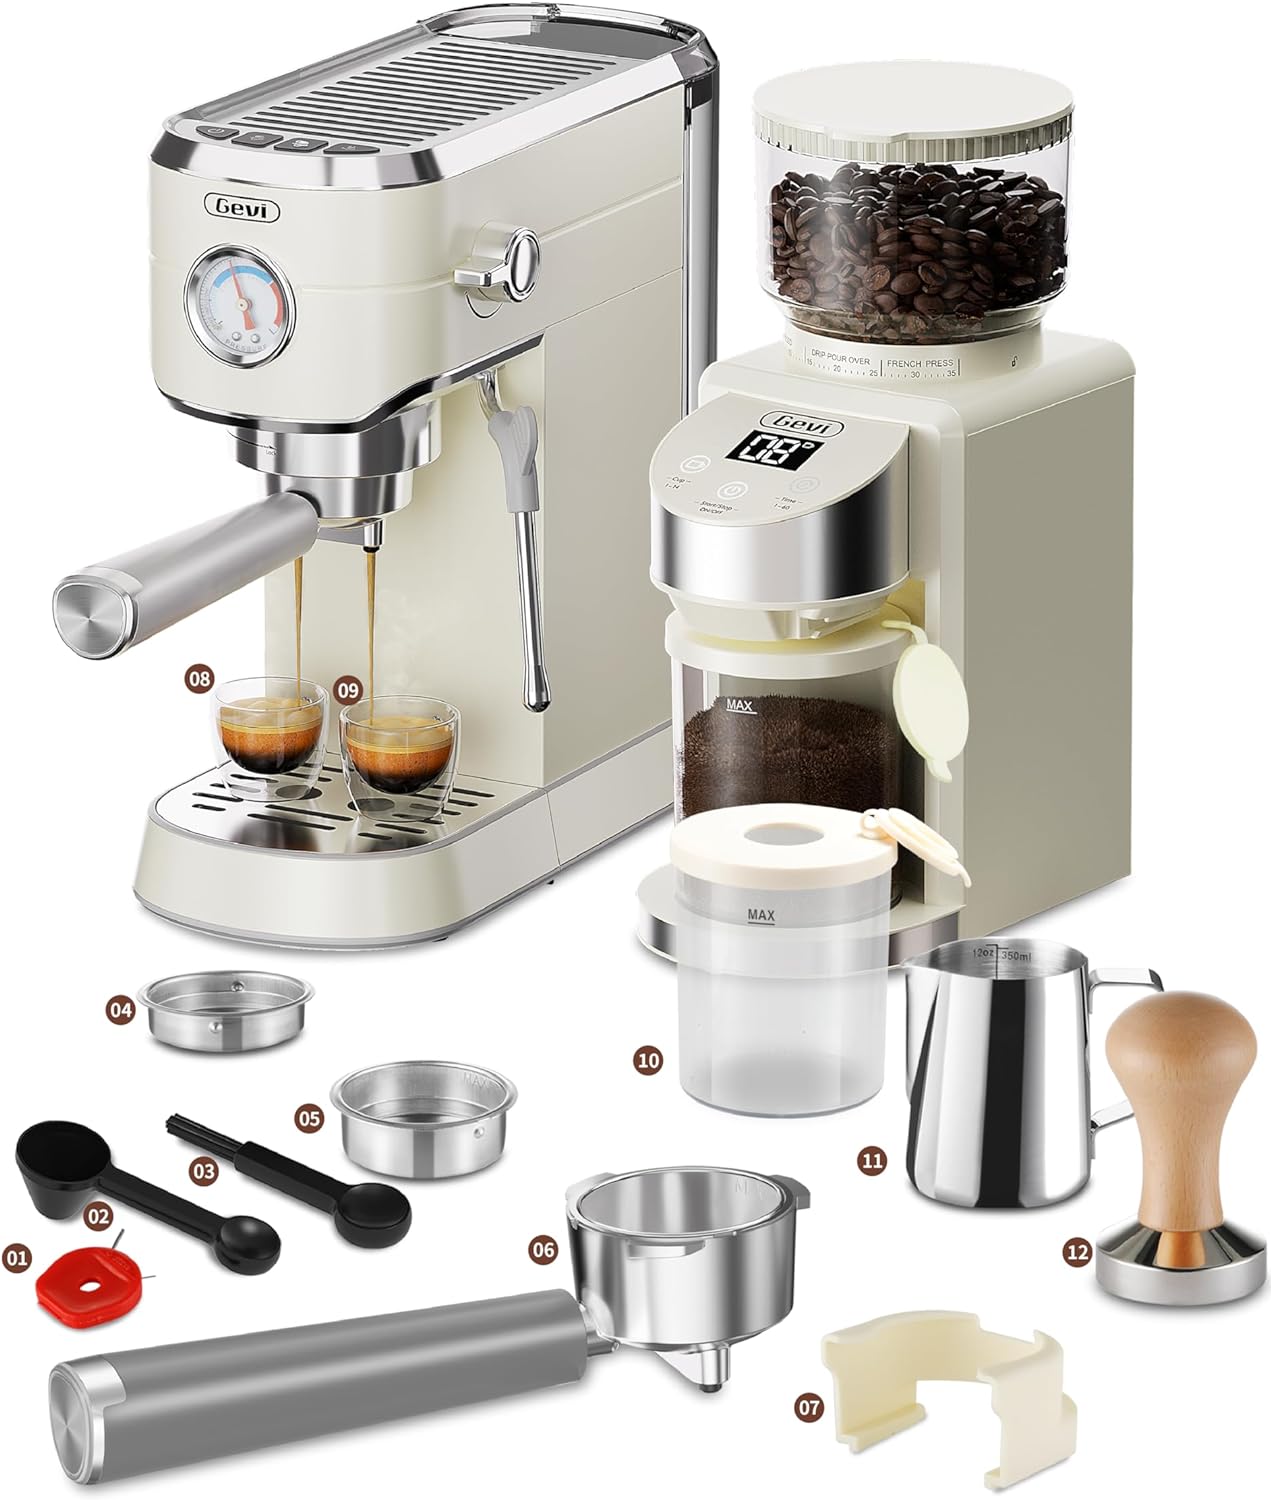 Gevi 20 Bar Compact Professional Espresso Coffee Machine with Milk Frother for Espresso, Latte and Cappuccino Burr Coffee Grinder with 35 Precise Grind Settings, Beige